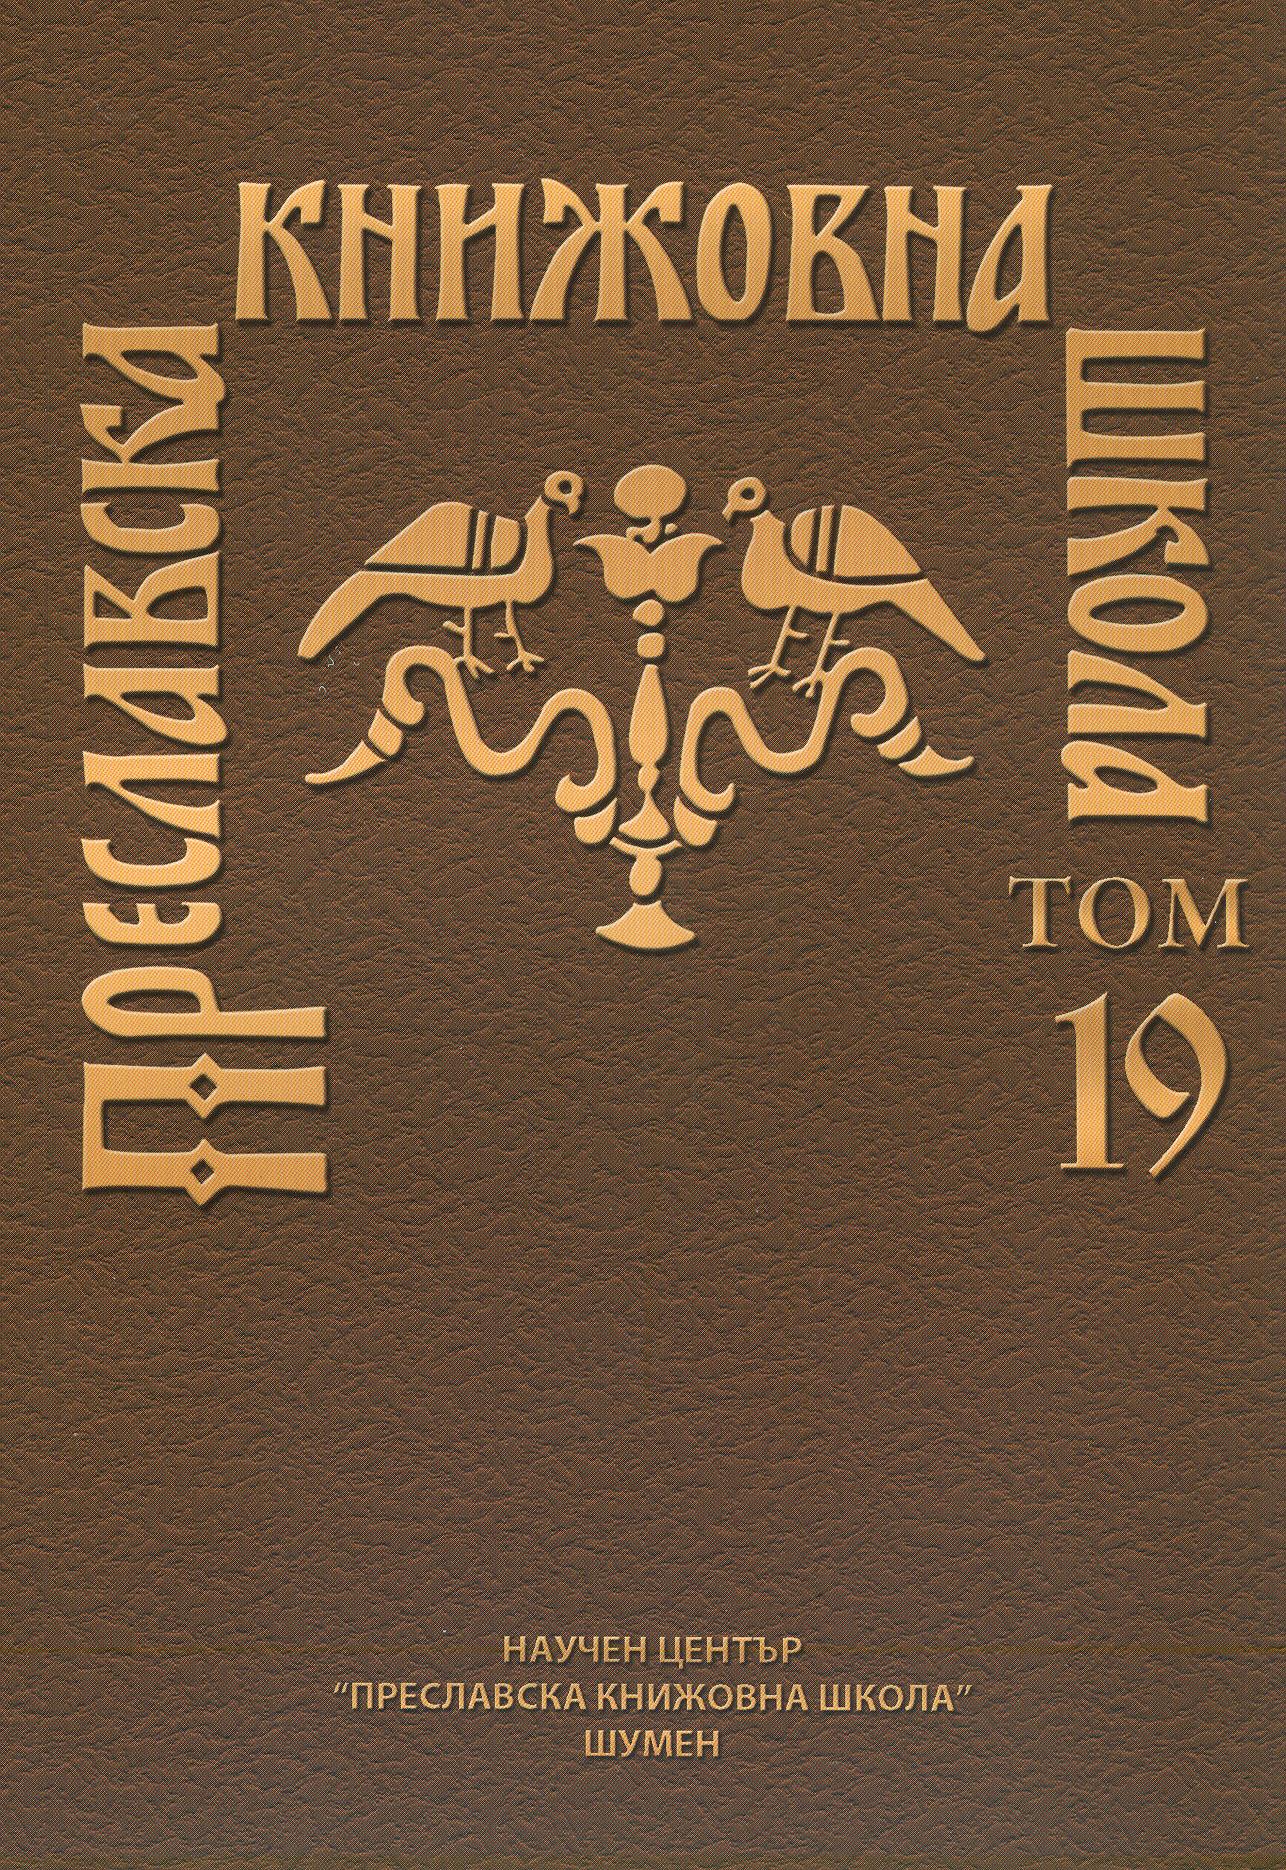 DEVELOPMENT OF THEOLOGICAL POLITICAL THOUGHT IN BULGARIA AT THE END OF 9TH AND BEGINNING OF 10TH CENTURY Cover Image